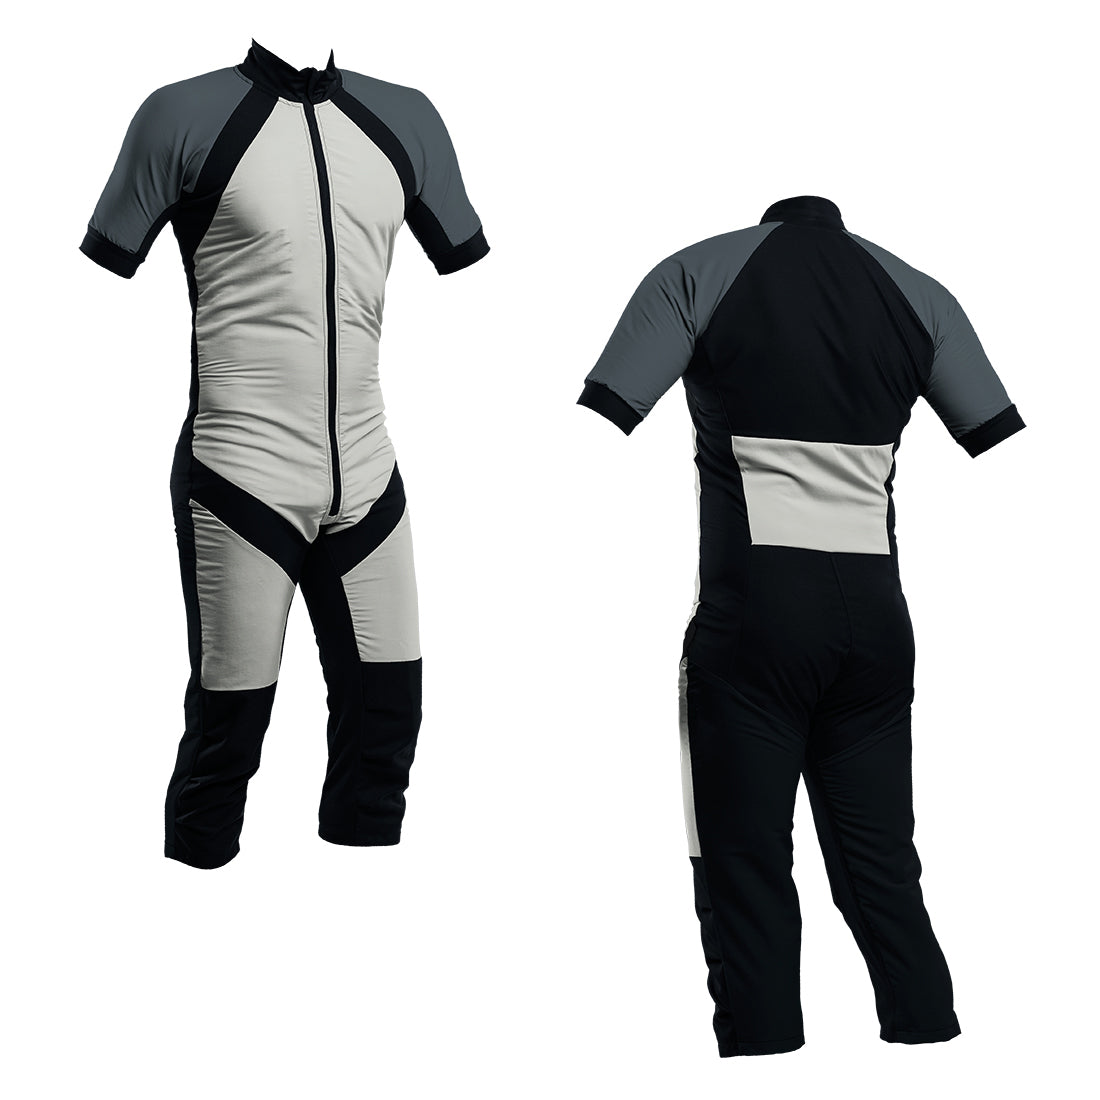 Skydiving Summer Suit Silver-Charcoal-Black S2-04